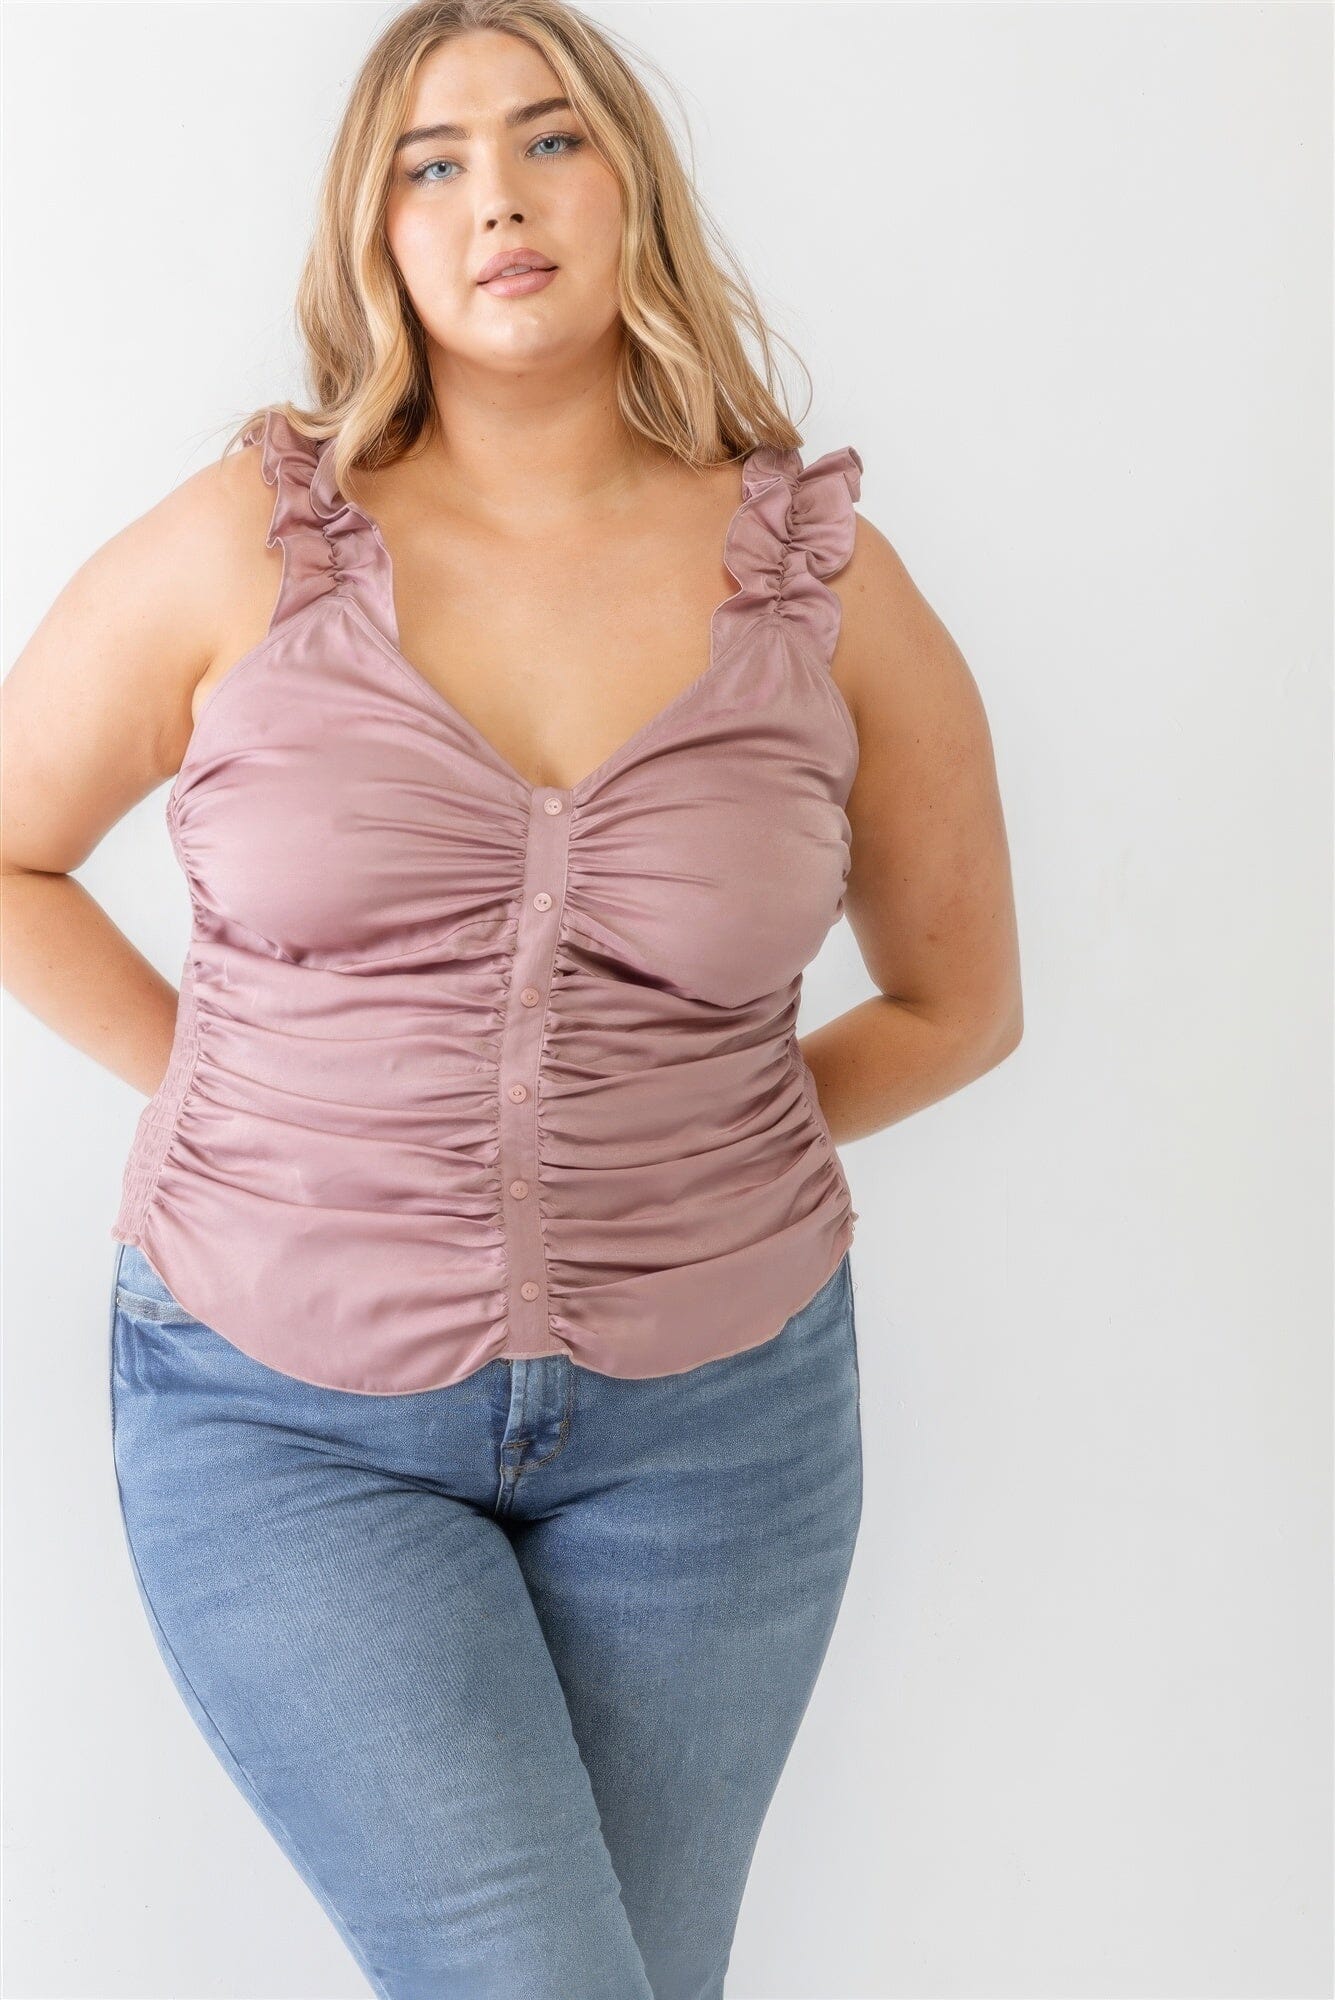 Plus Size Mauve Ruched Button-up Ruffle Strap Smocked Back Tank Top Shirts & Tops jehouze 